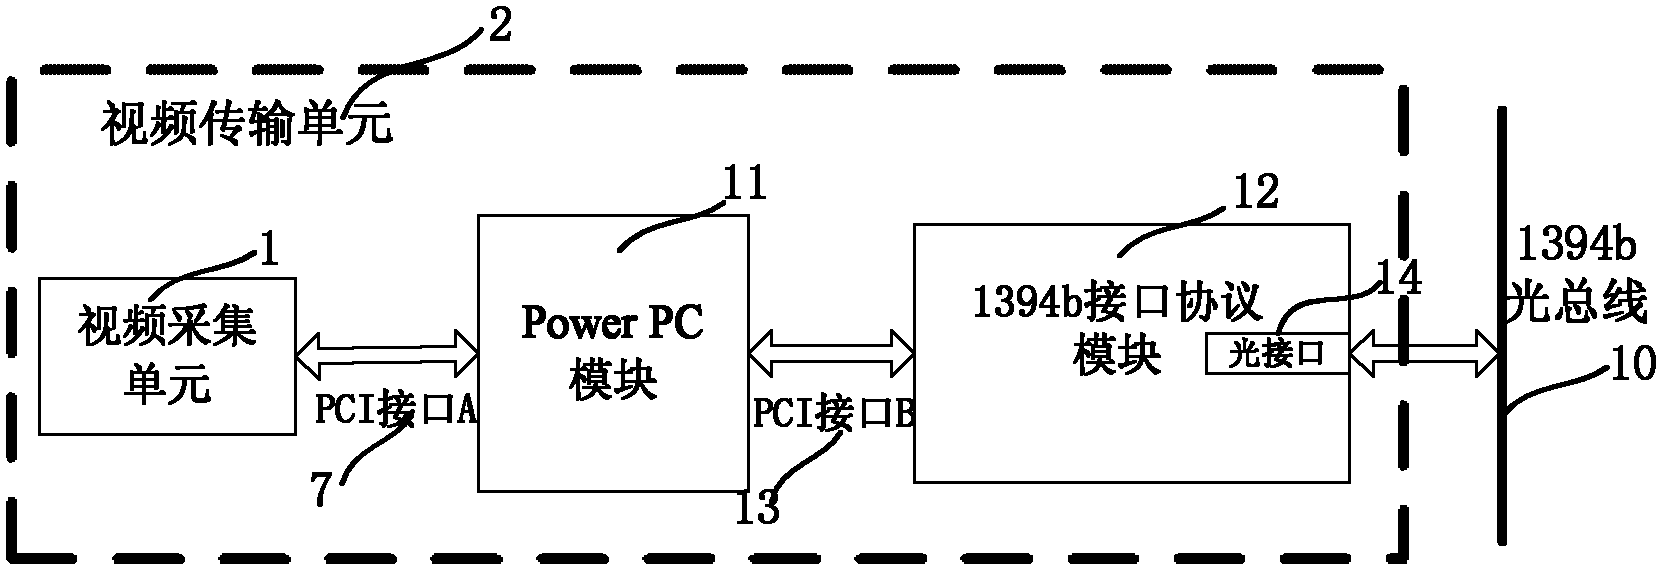 Multichannel video system on basis of 1394b optical bus and data collecting and transmitting method thereof